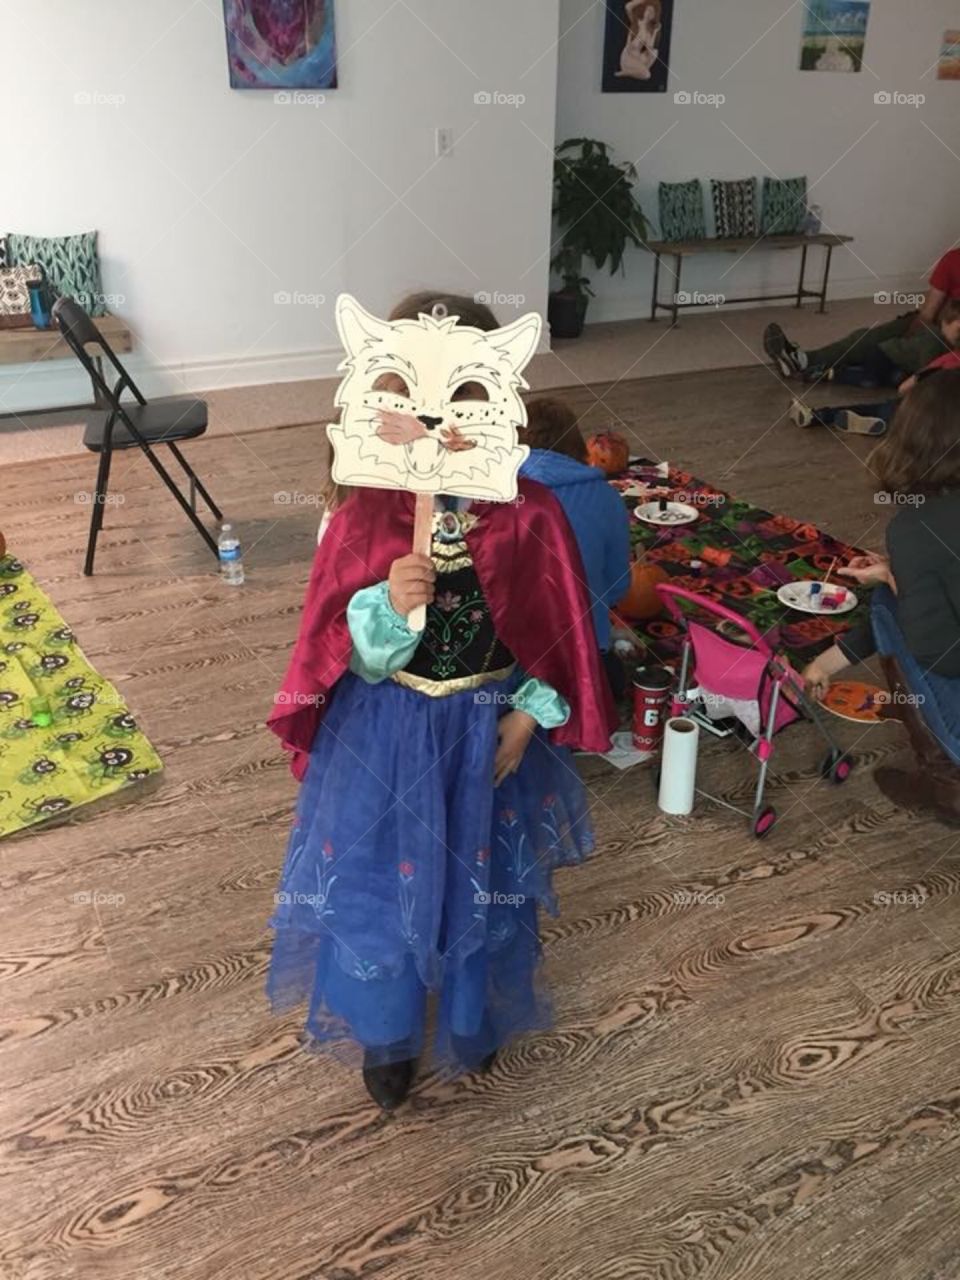 My little sister during halloween at LOST